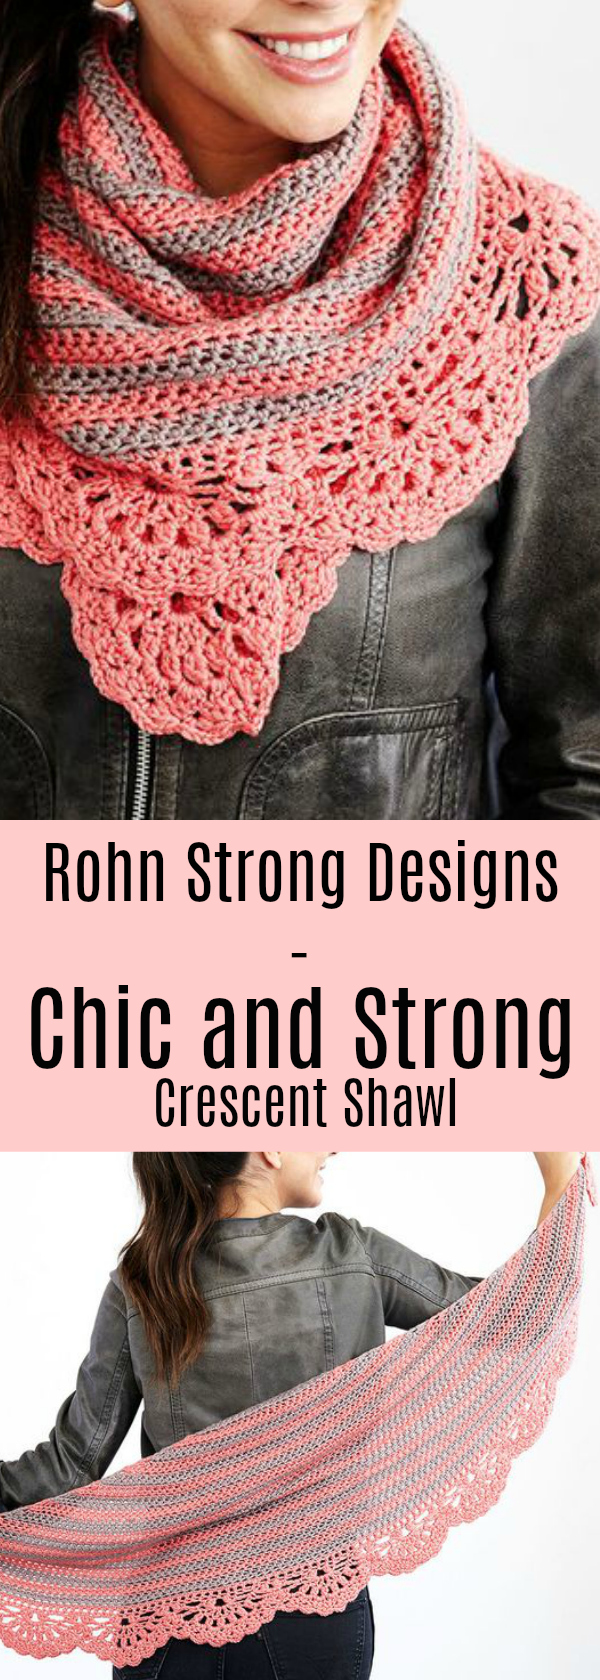 Pinterest - Chic and Strong - 1